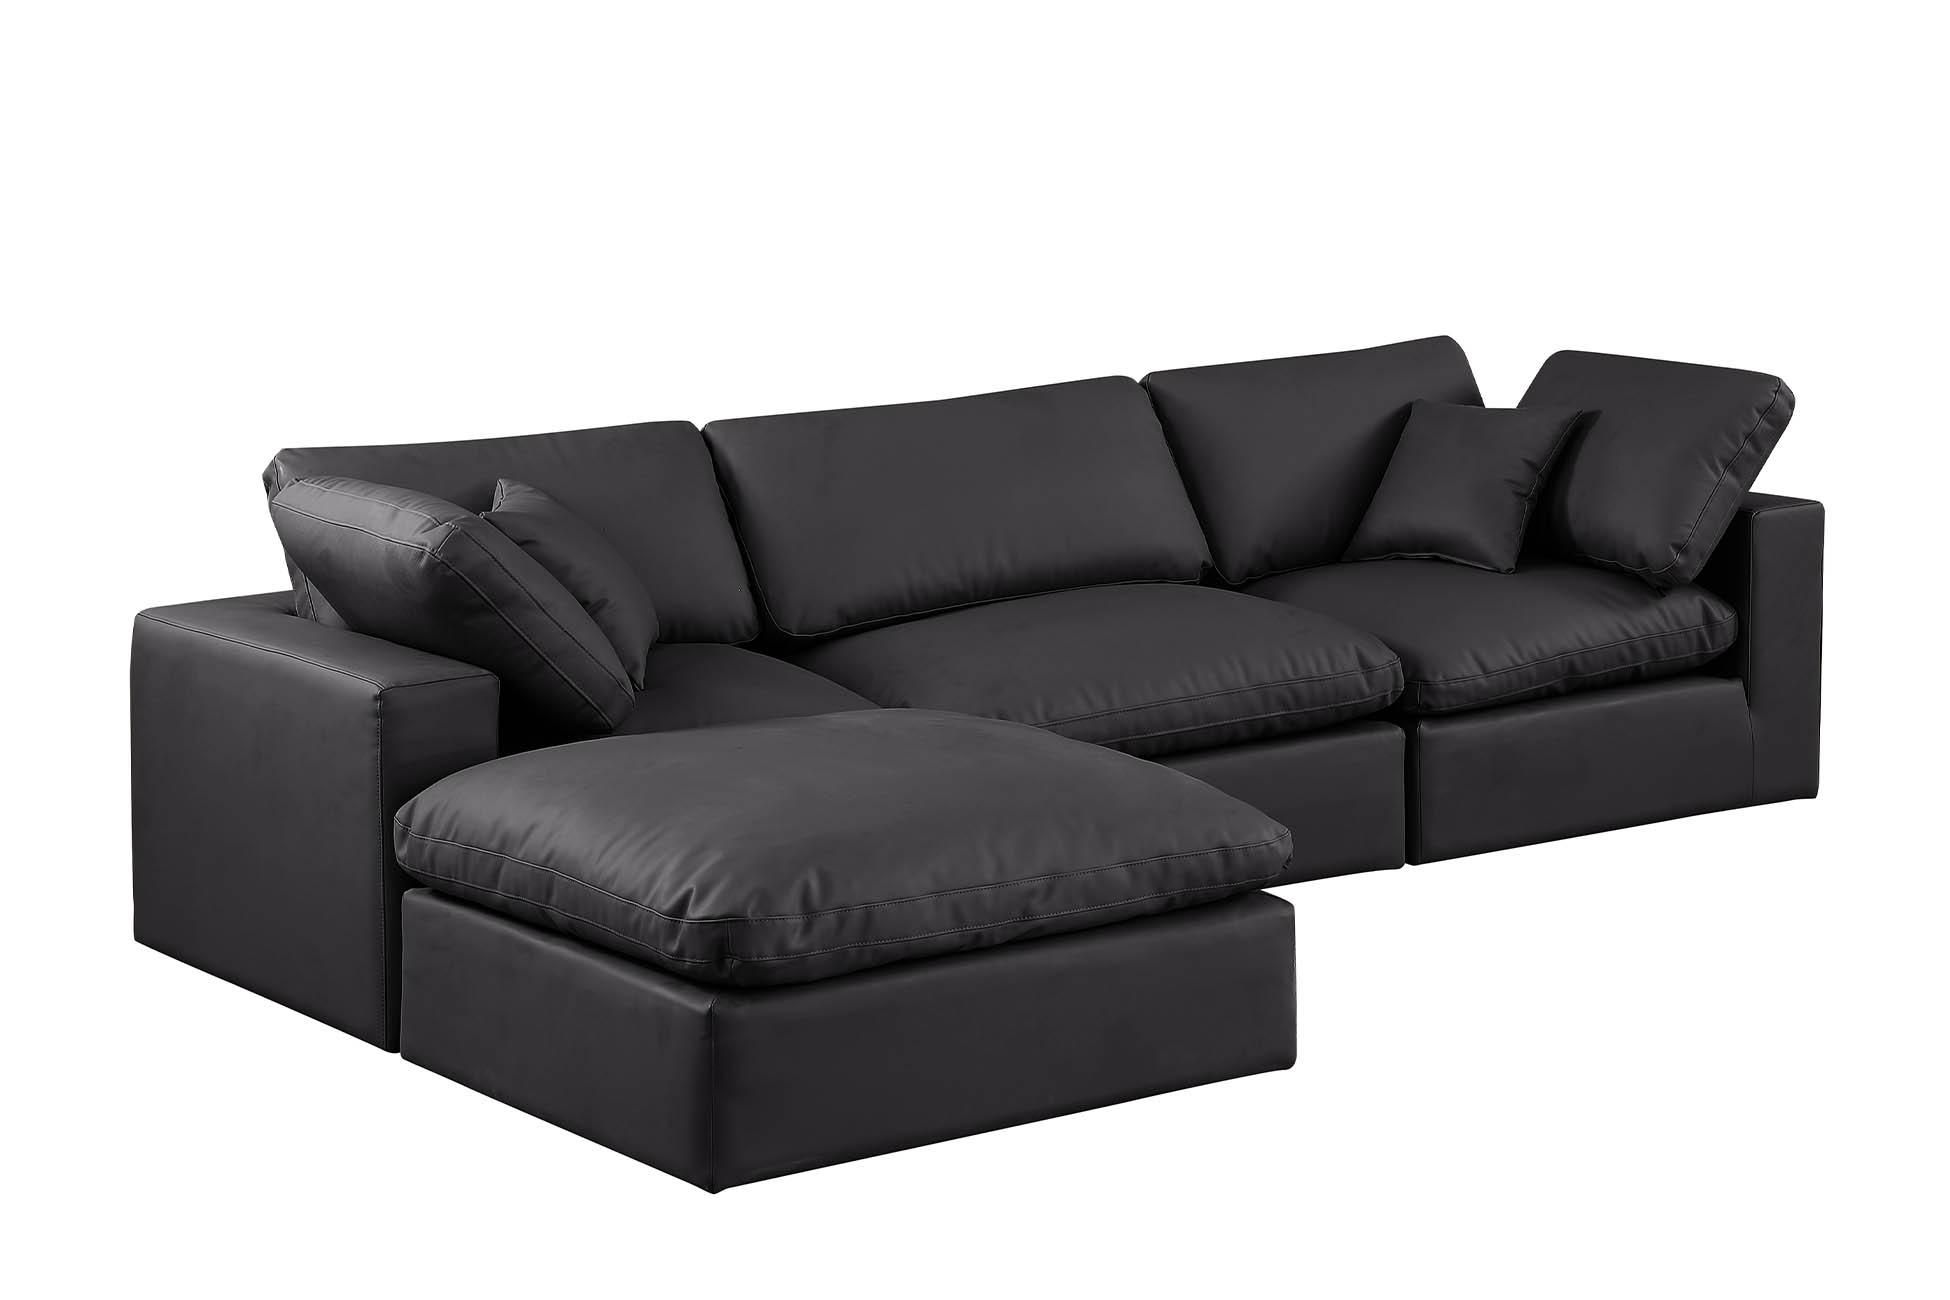 Contemporary, Modern Modular Sectional 188Black-Sec4A 188Black-Sec4A in Black Faux Leather